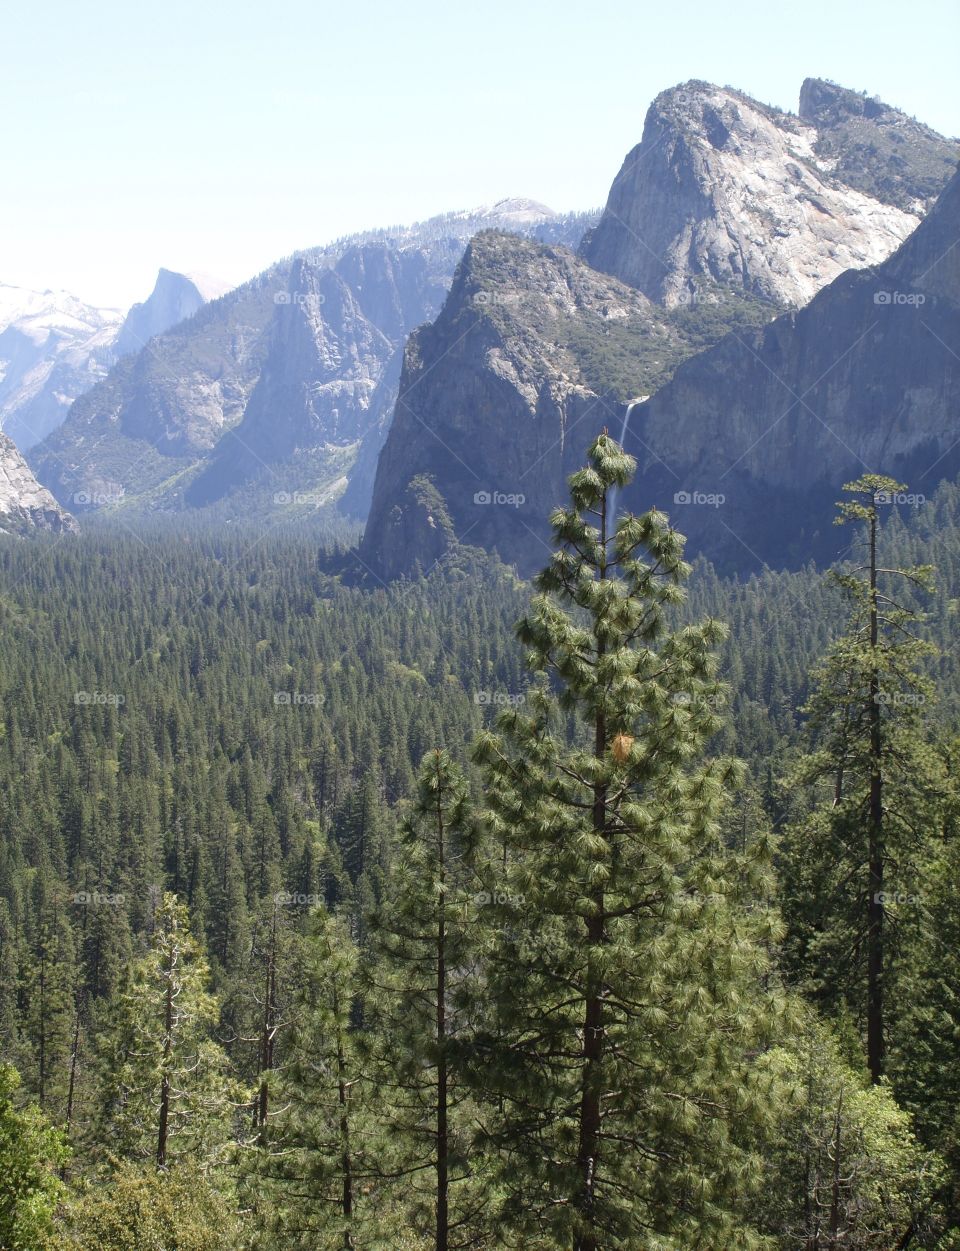 Yosemite vistas - an awesome park and a great place to explore and experience the outdoors